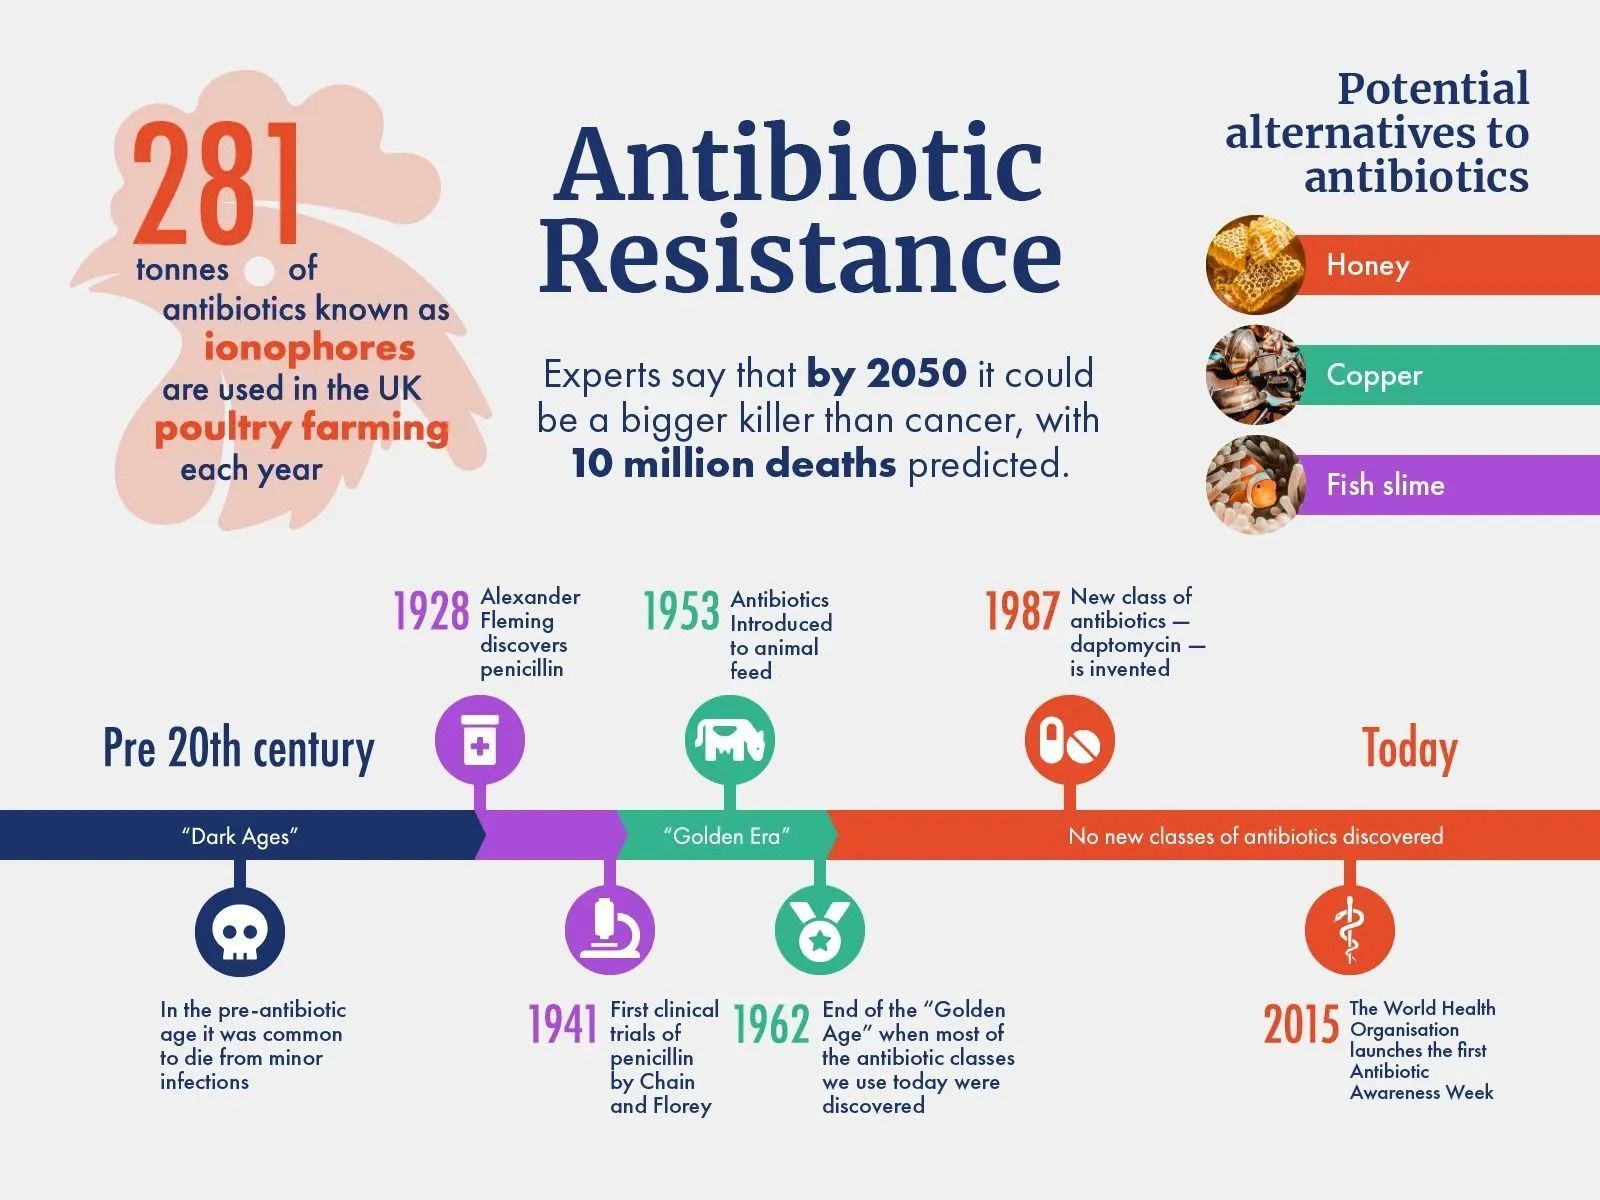 Copies of antibiotic resistance genes greatly elevated in humans and livestock